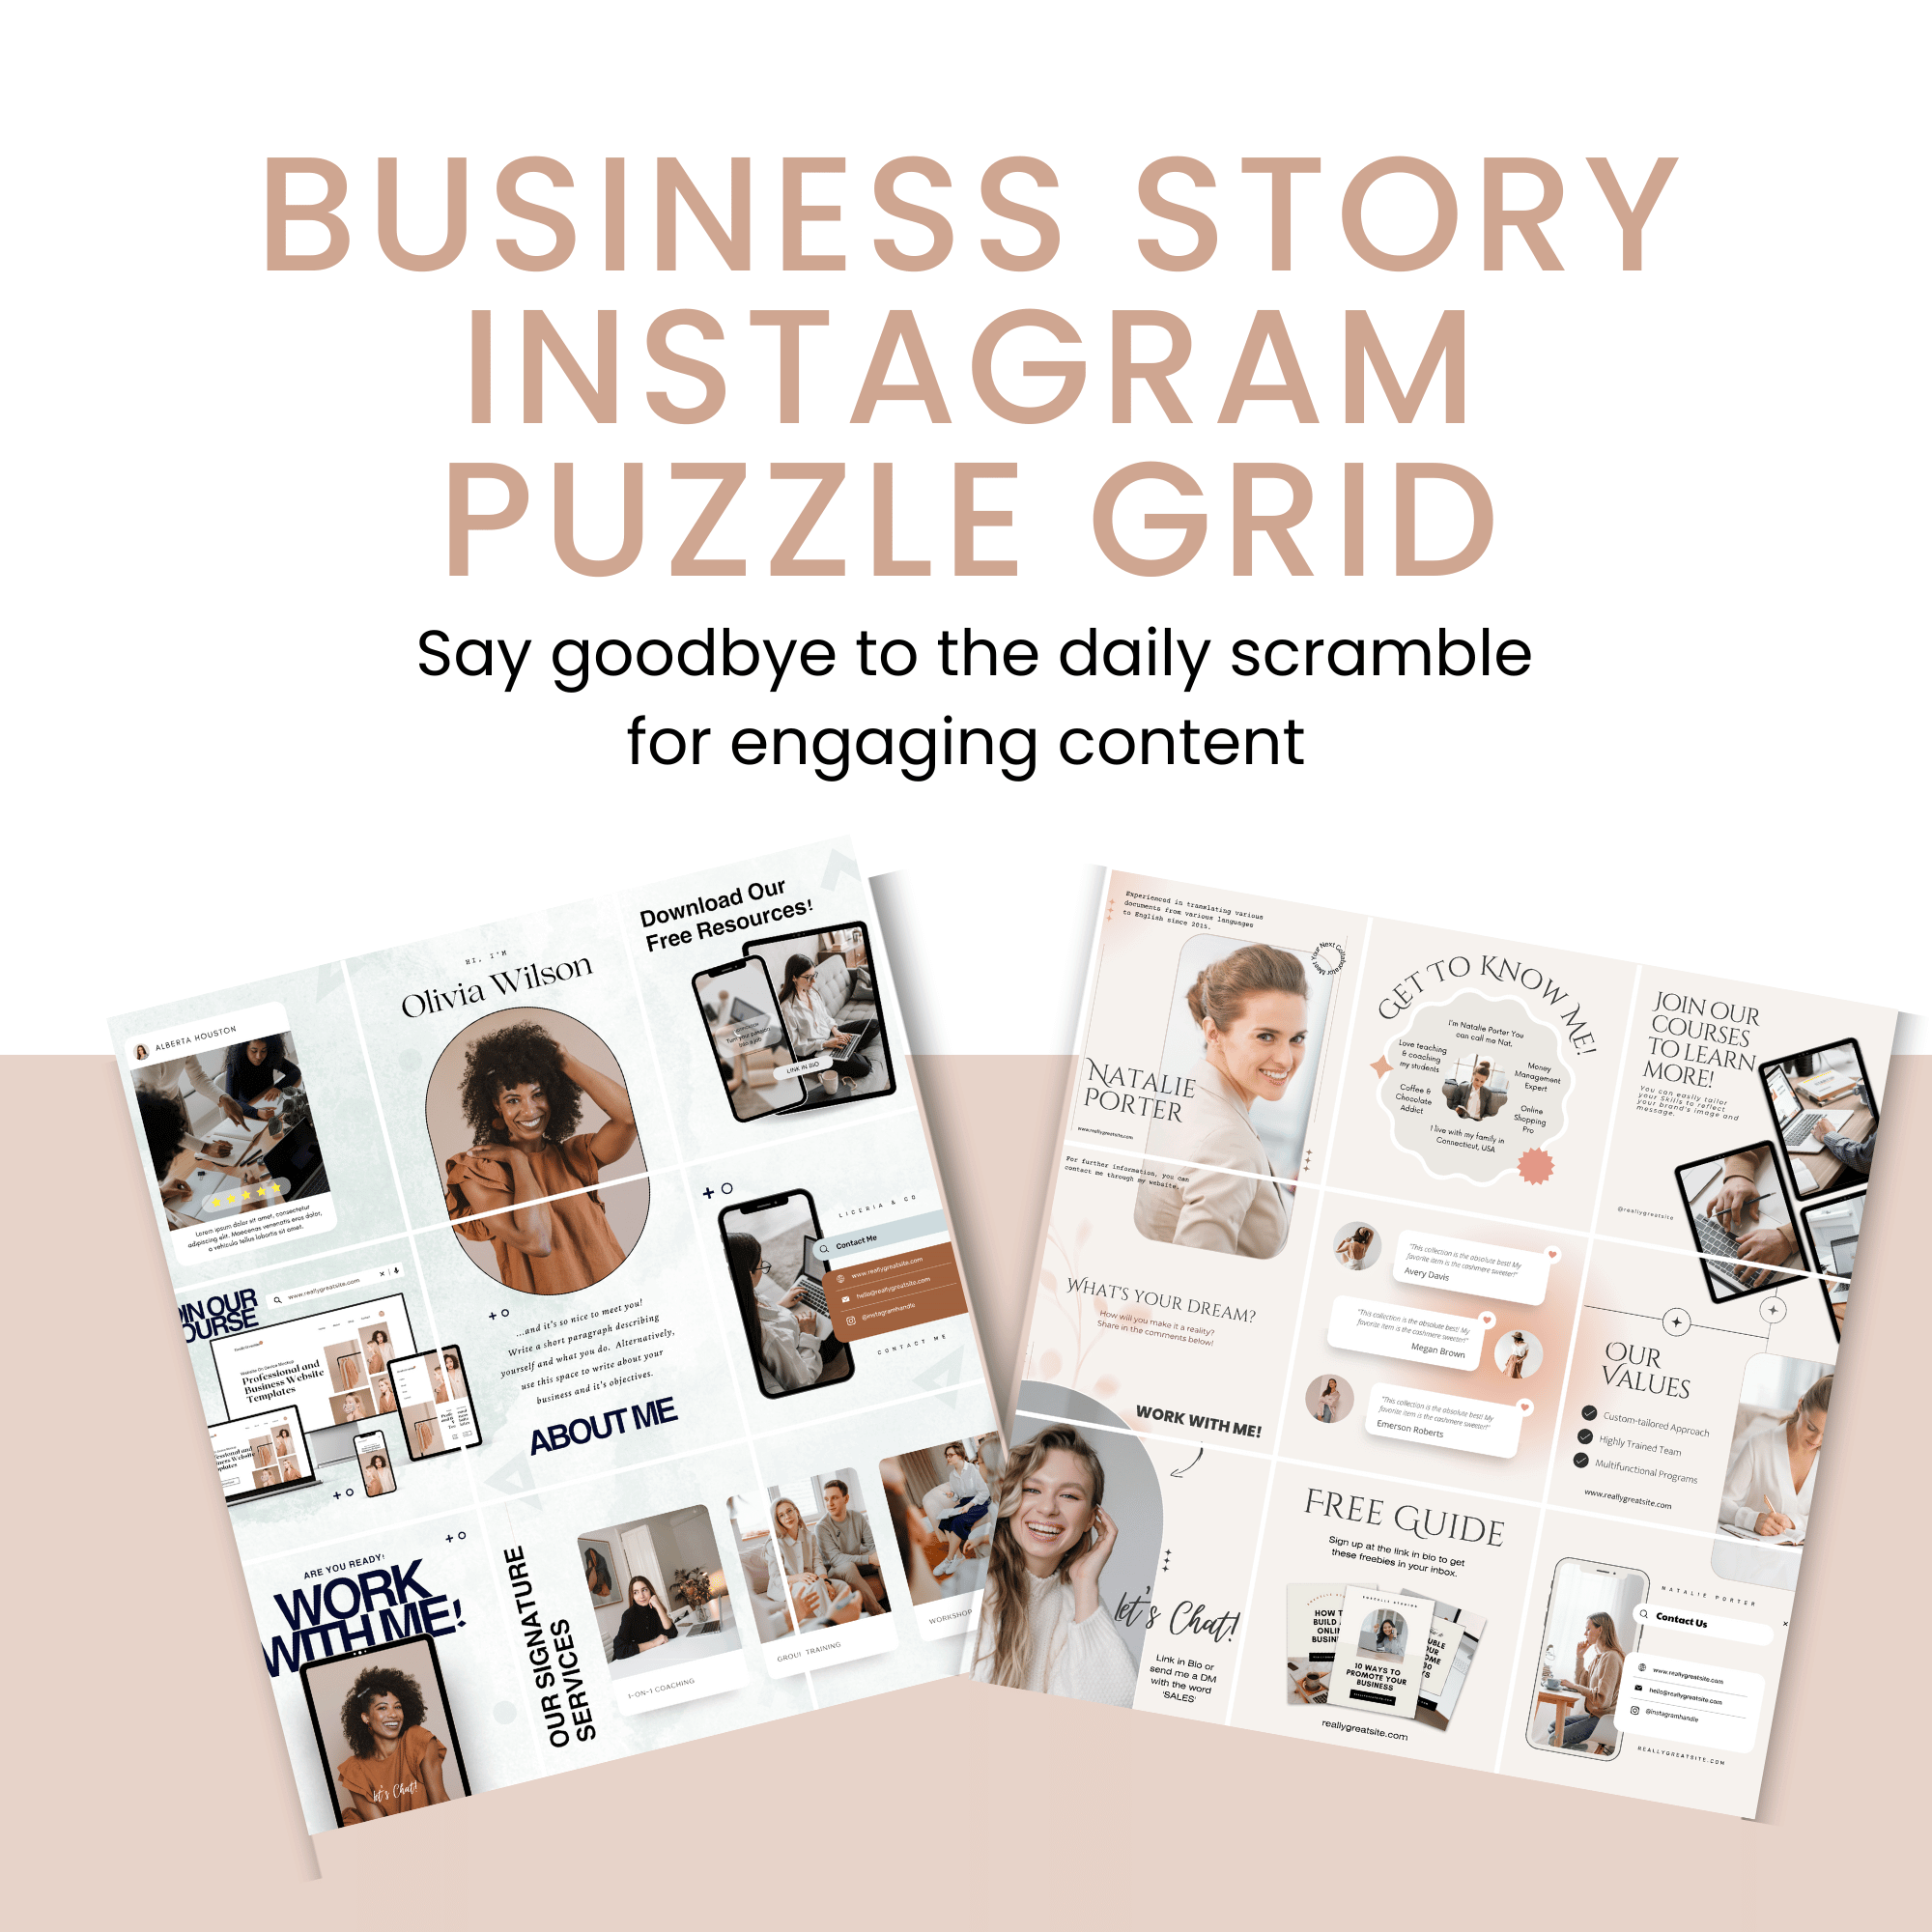 Business Story Instagram Puzzle Grid